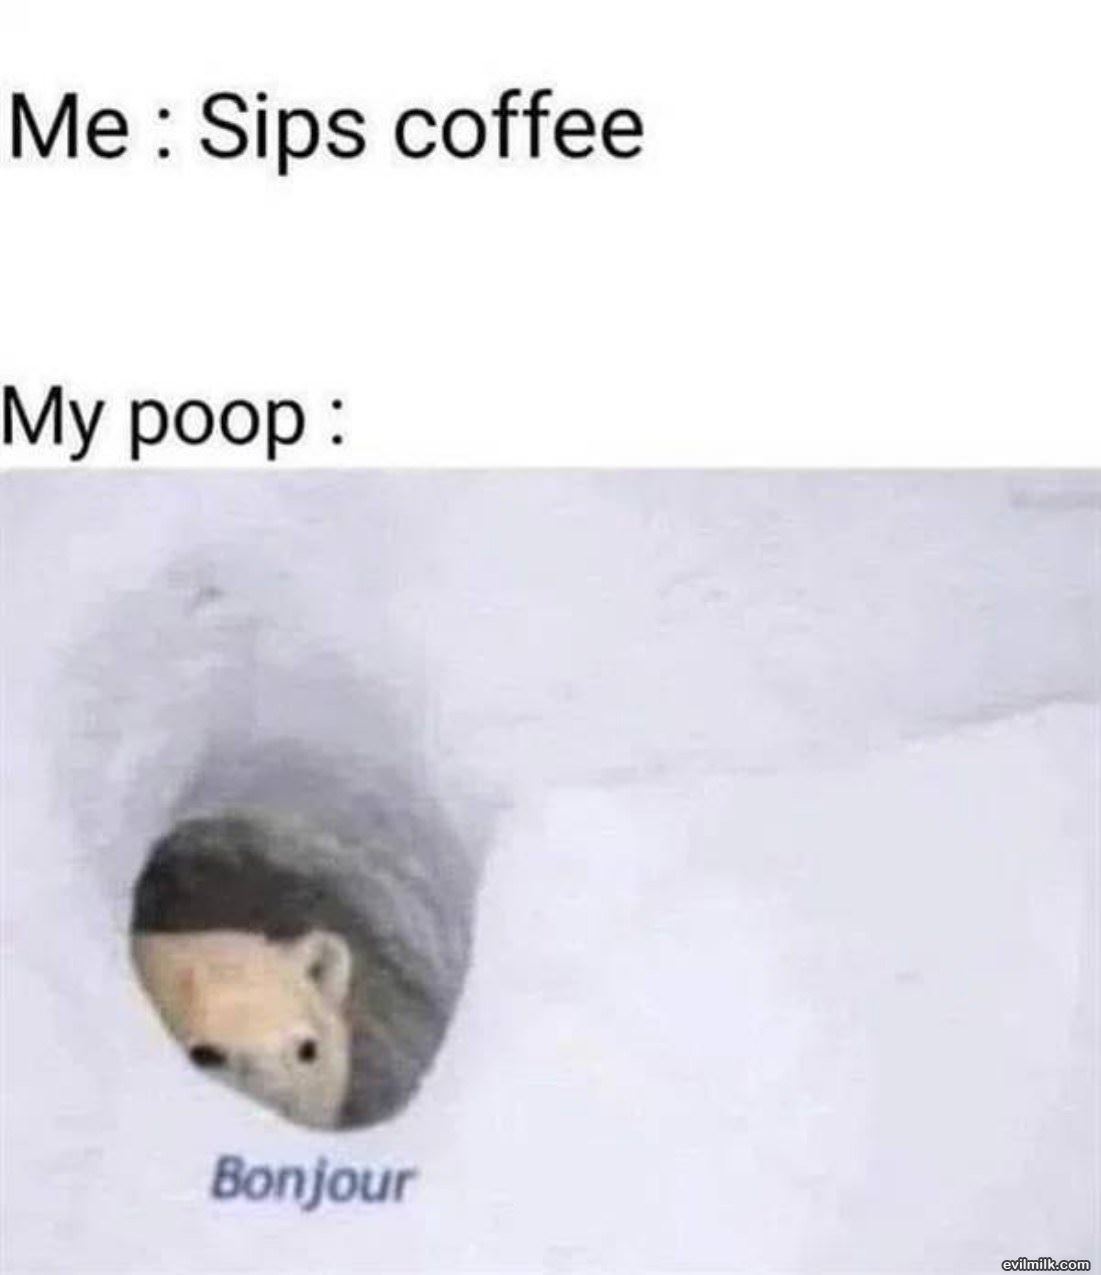 Sips The Coffee